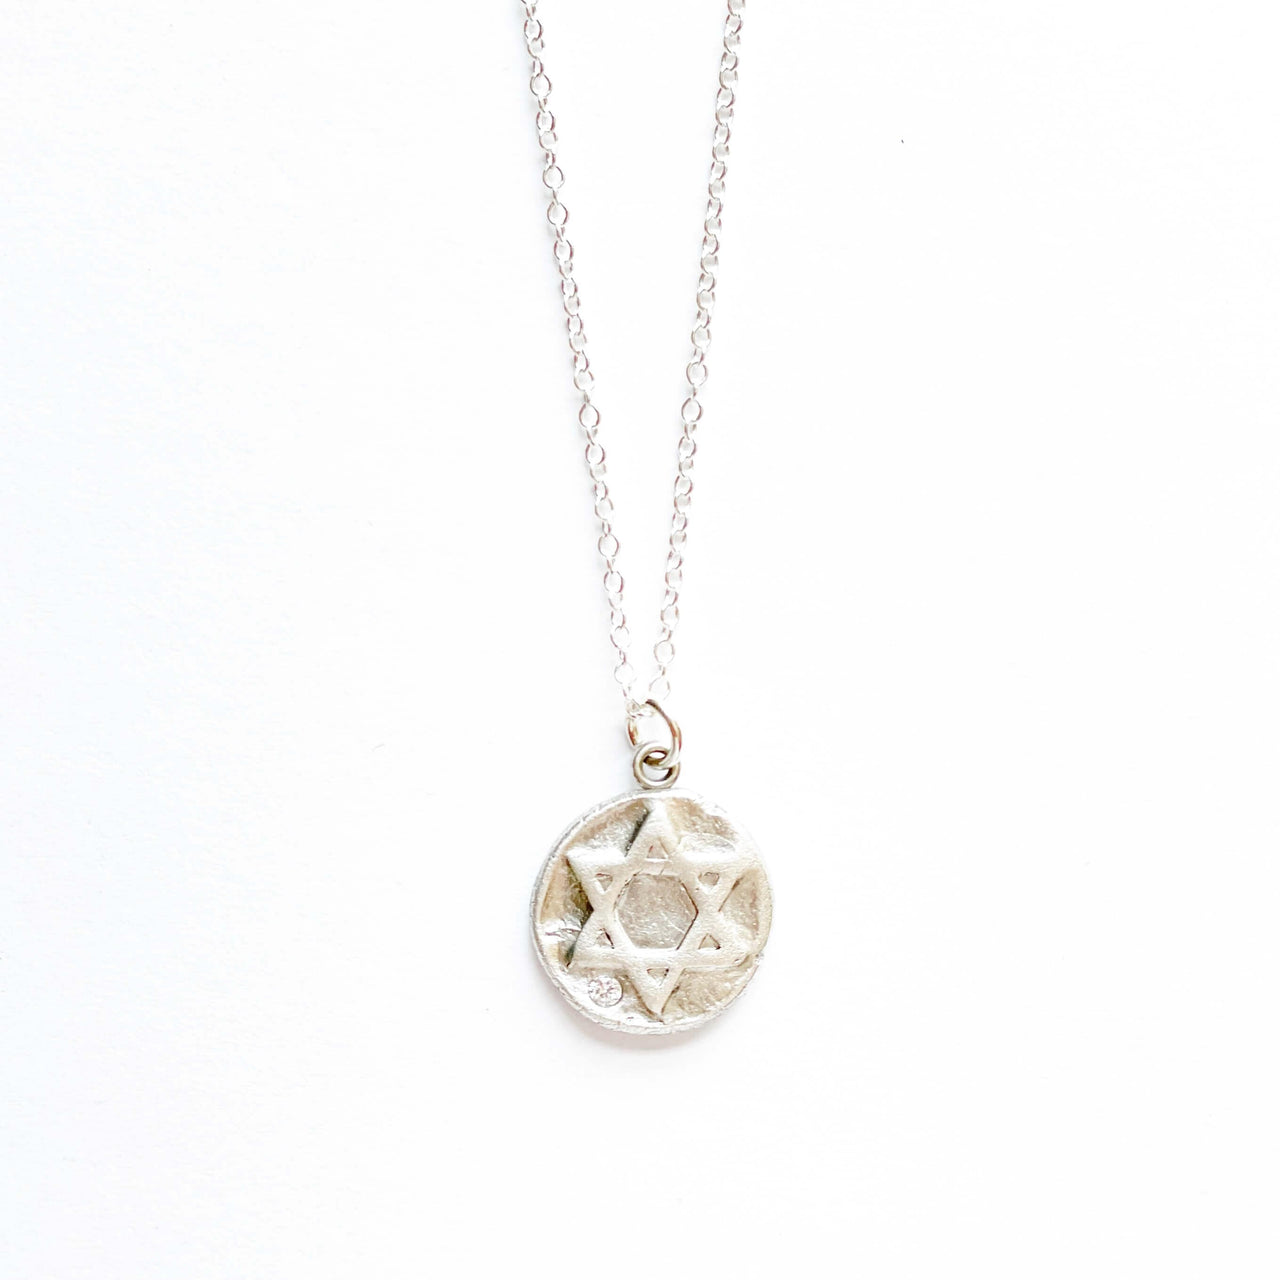 MAS Designs Jewelry Necklaces Yellow Gold Rustic Star of David Silver Necklace with Crystal